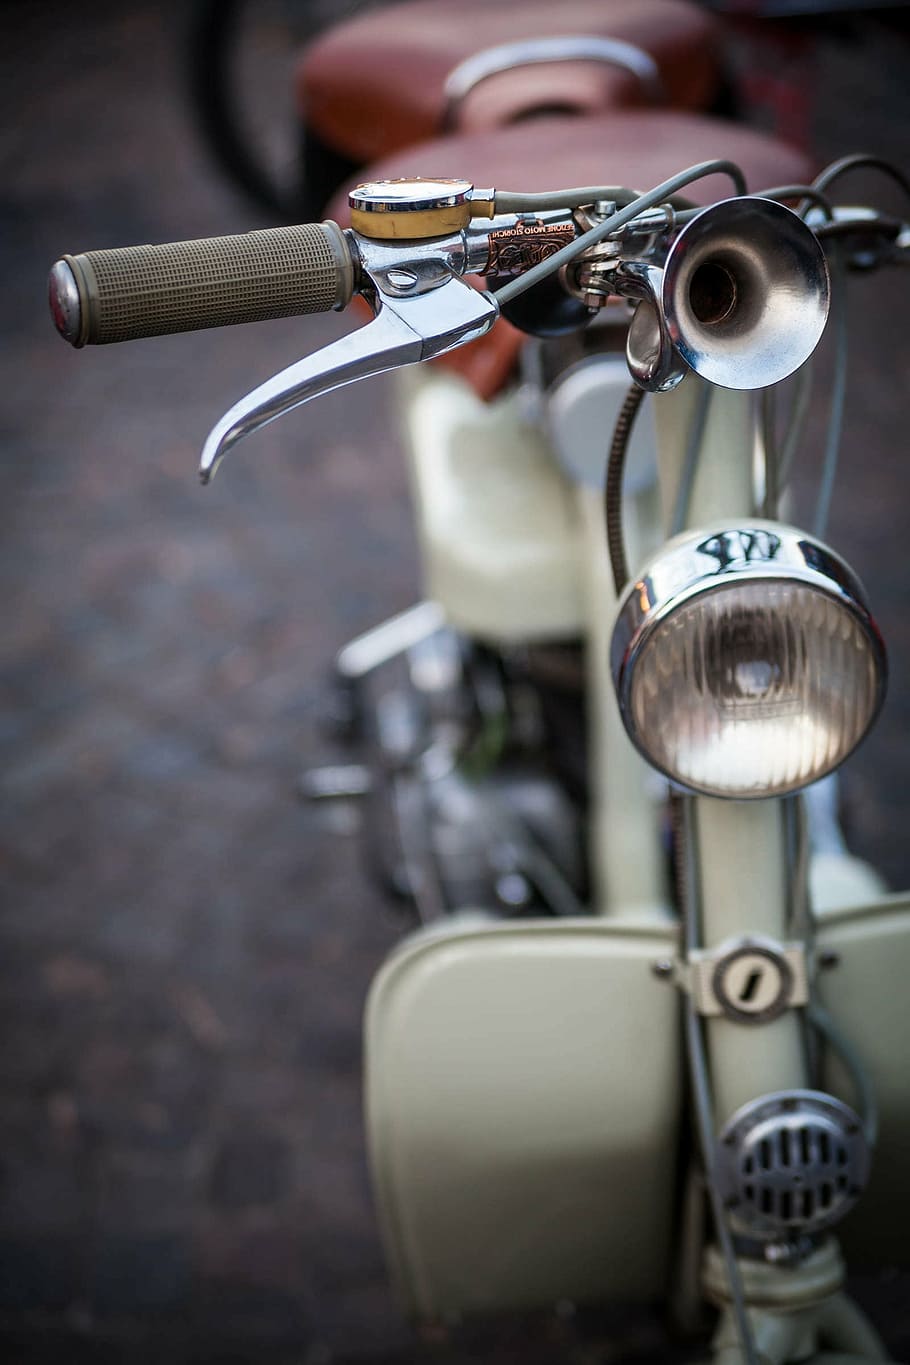 wasp, era, ancient, vintage motorcycles, style, particular